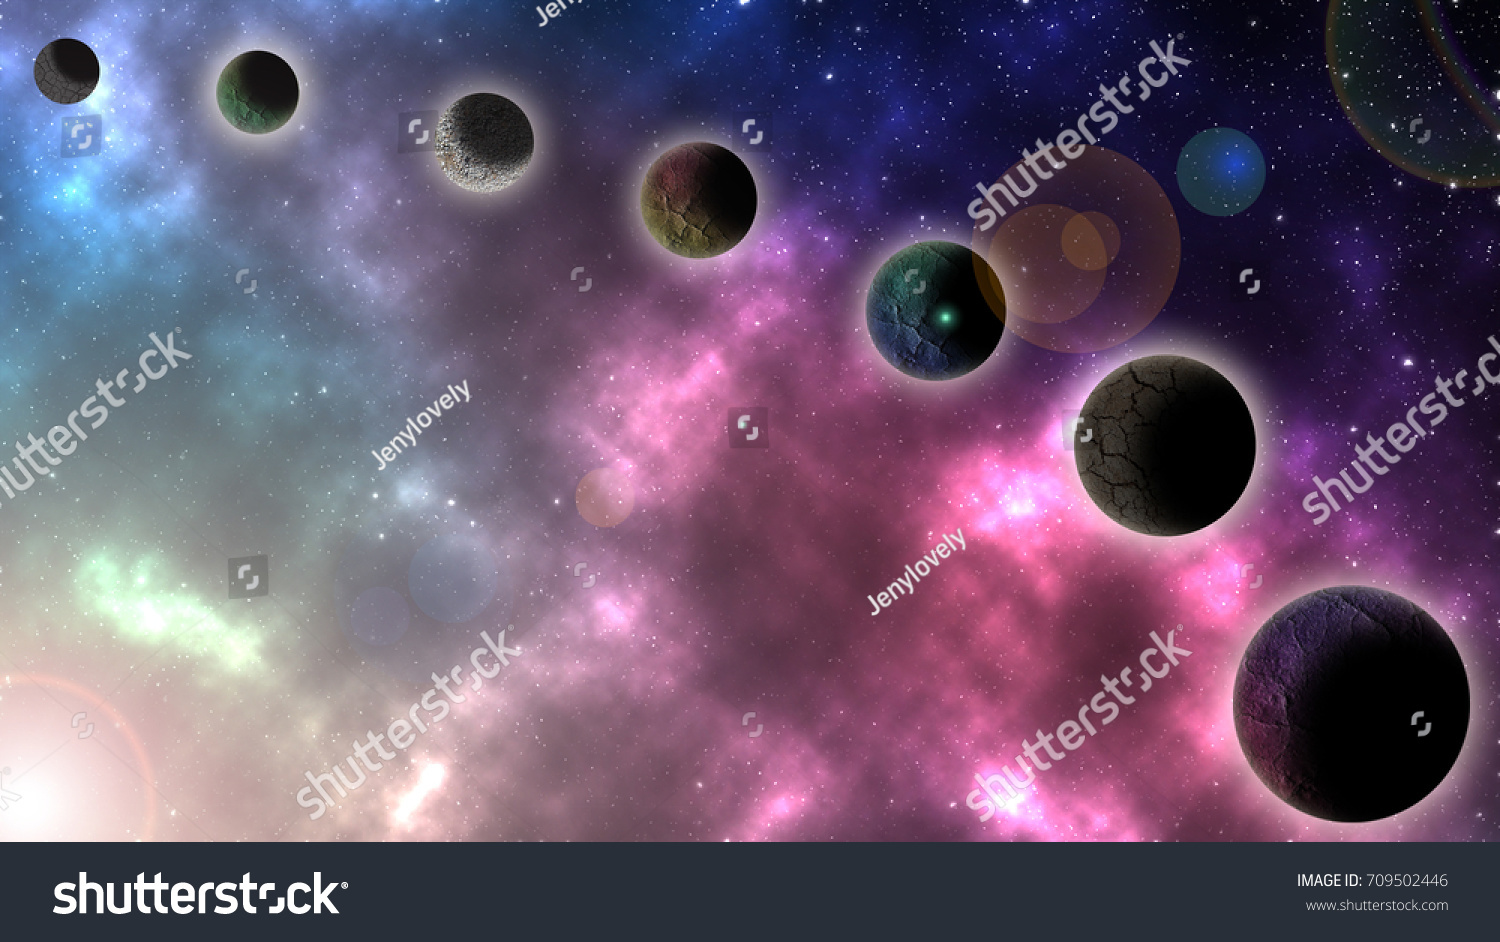 Universe filled with stars and galaxy abstract background. #709502446